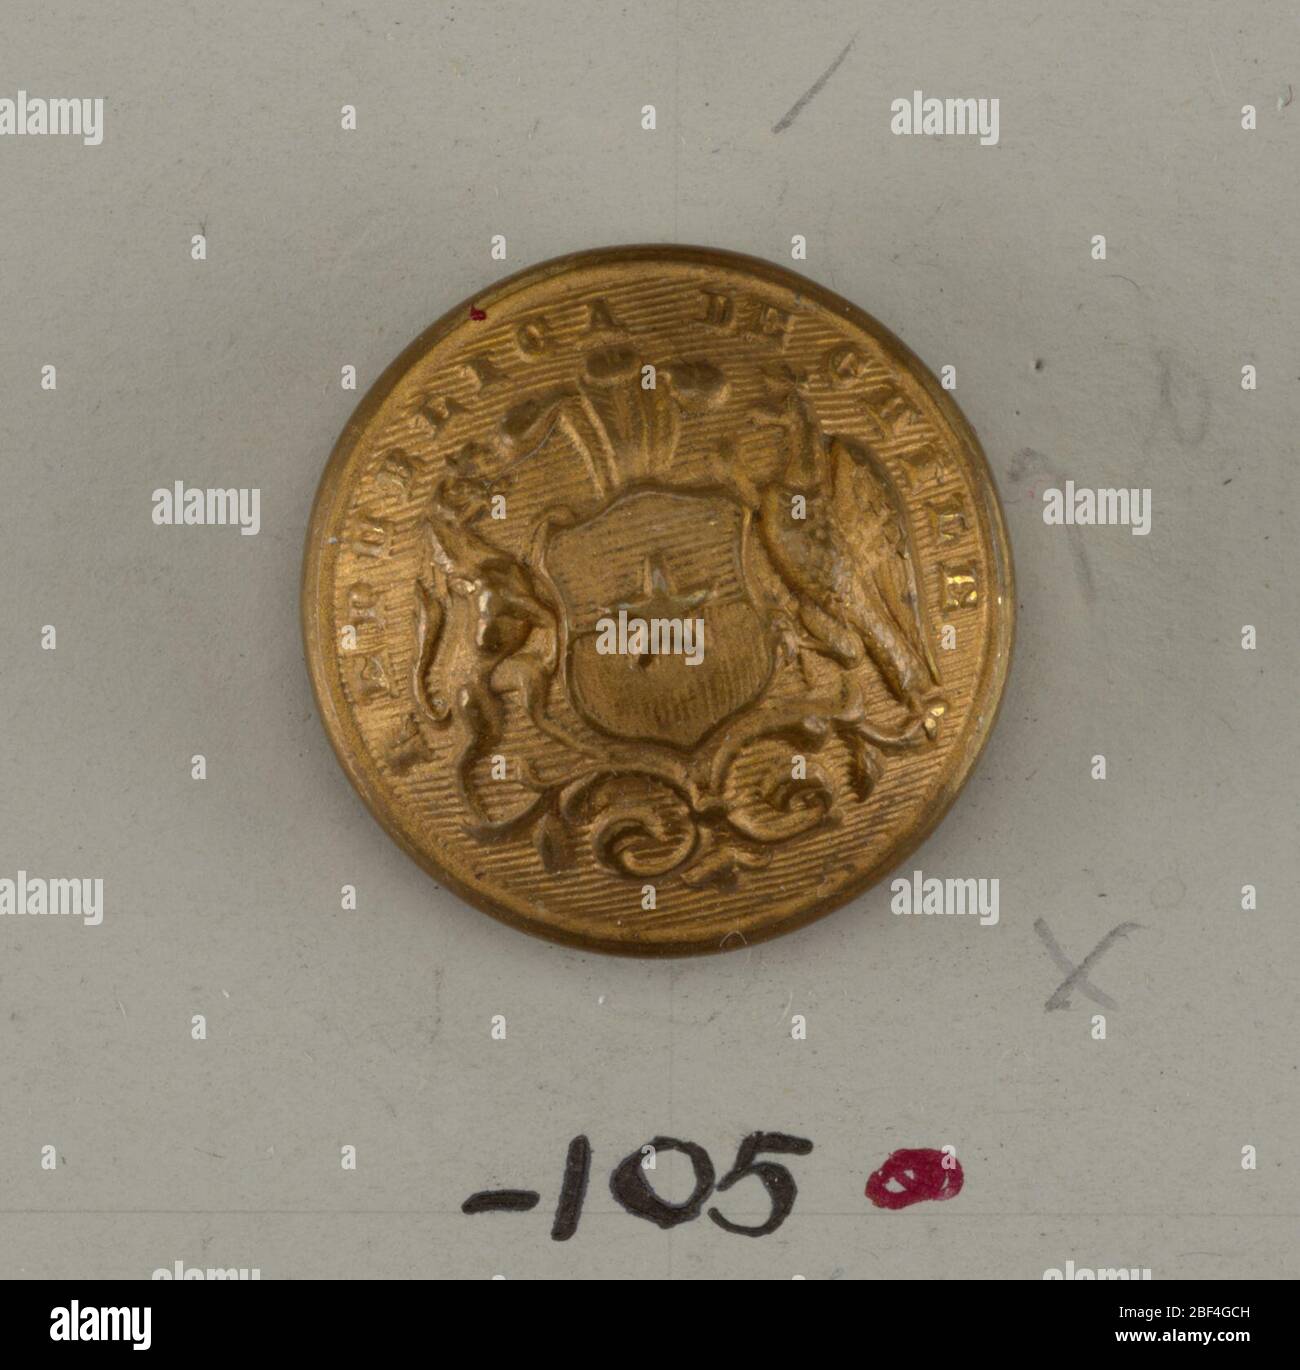 Button. Convex ornamented by shield showing star with horse and eagle supporters standing on scroll; plumes at top of shield. 'Republica de Chile' around edge of button. Brass back and shank. On reverse, 'Extra Fein'.On card D Stock Photo